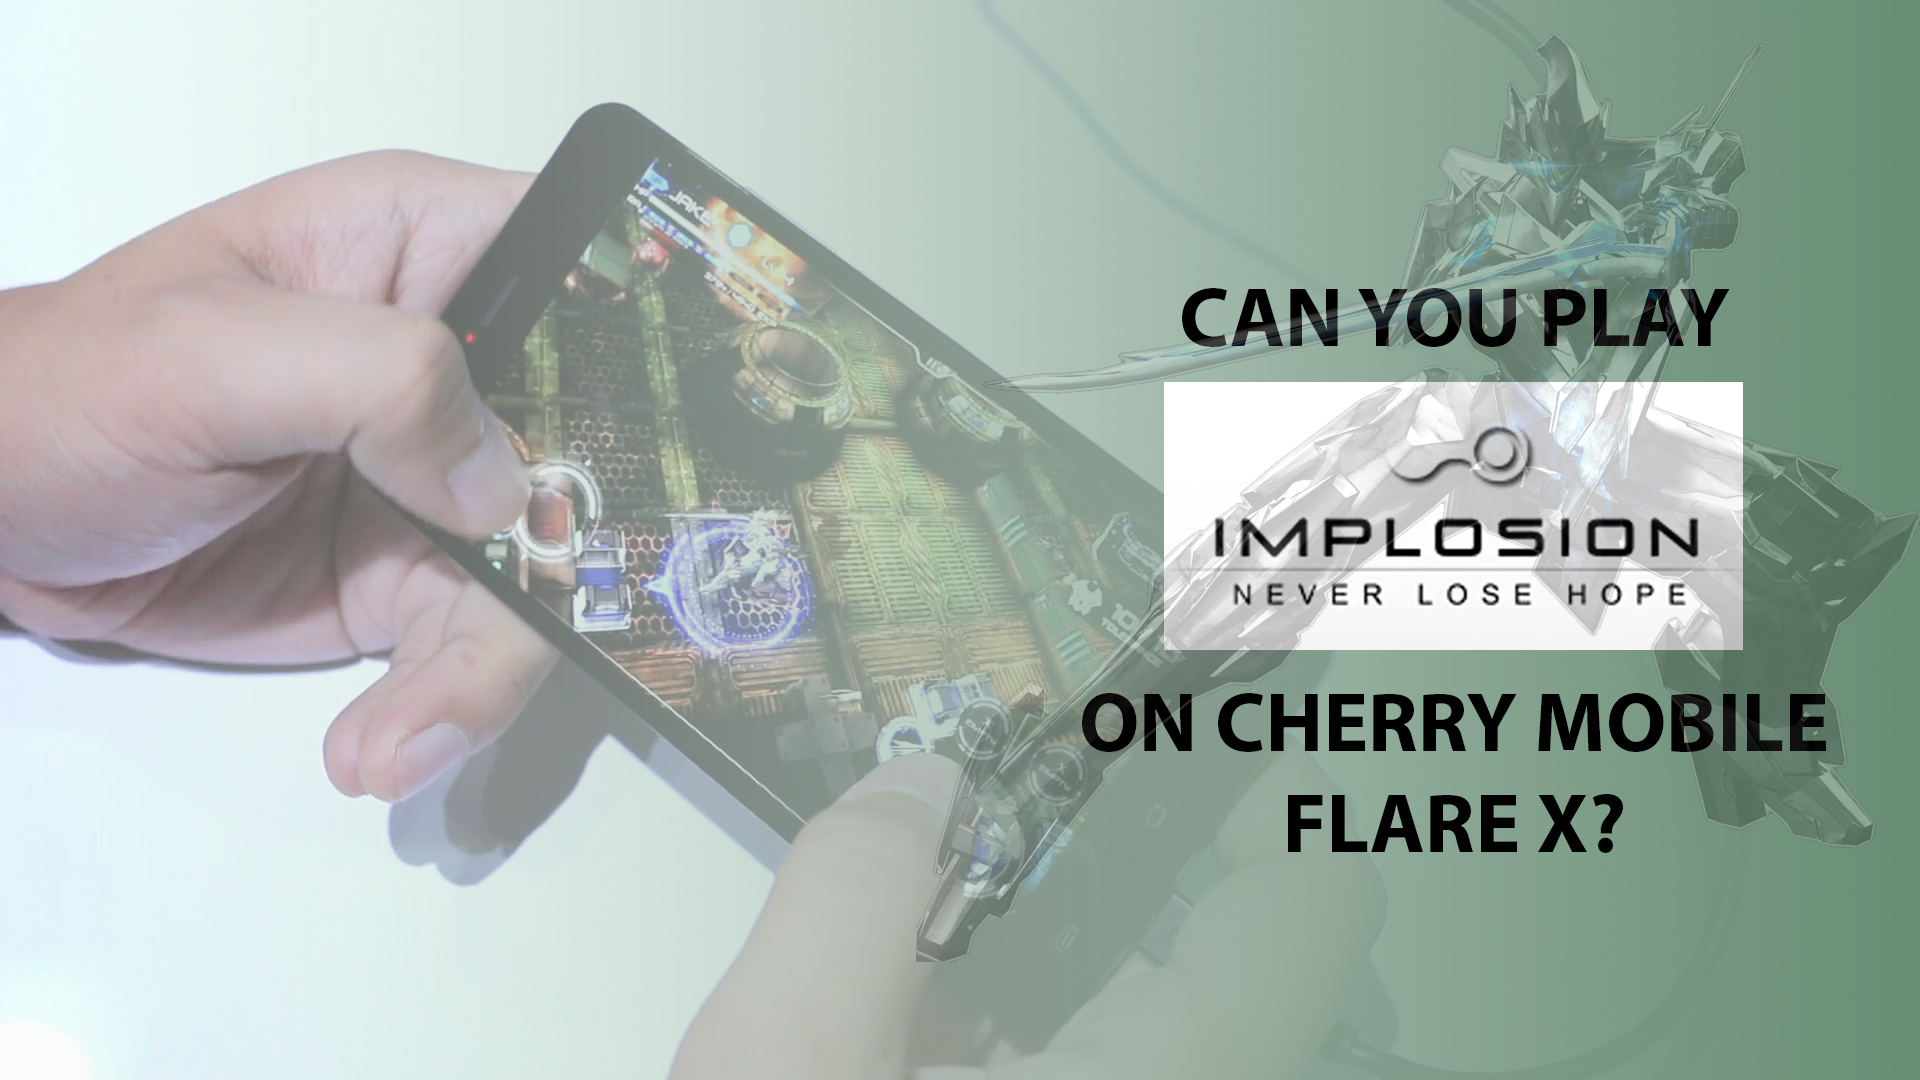 Can You Play Implosion on Cherry Mobile Flare X?